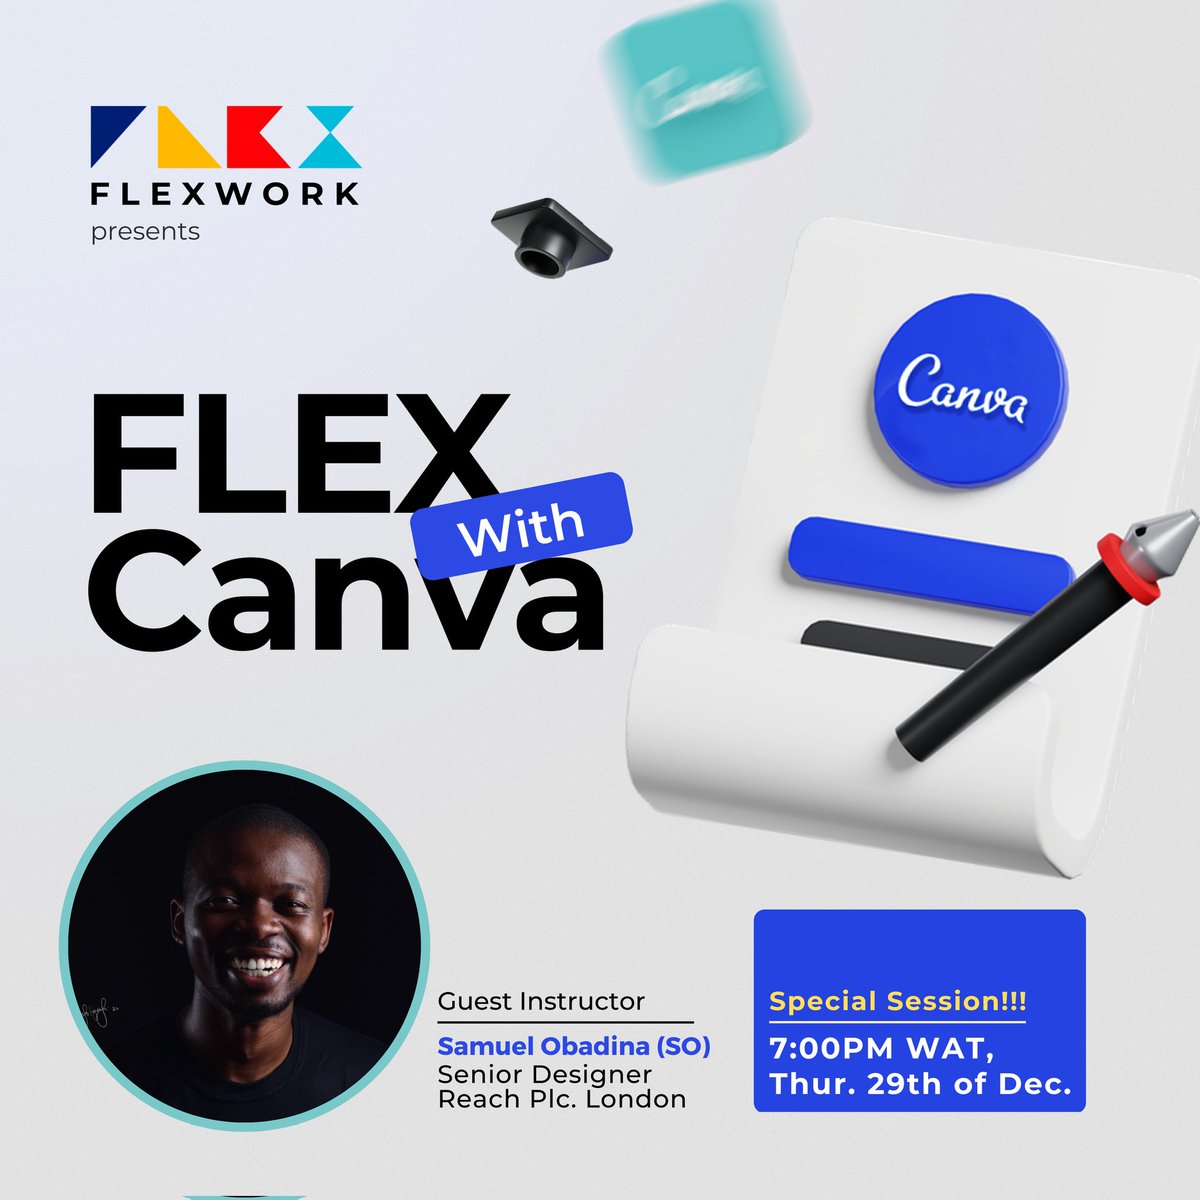 Did you register for the FlexWithCanva Training organized by @flexworkng

Then you don't want to miss this Thursday Special Session with @soobadina Samule Obadina (SO), Senior Designer at Reach Plc, London.

See you in Class! pic.twitter.com/stEcVixTKk